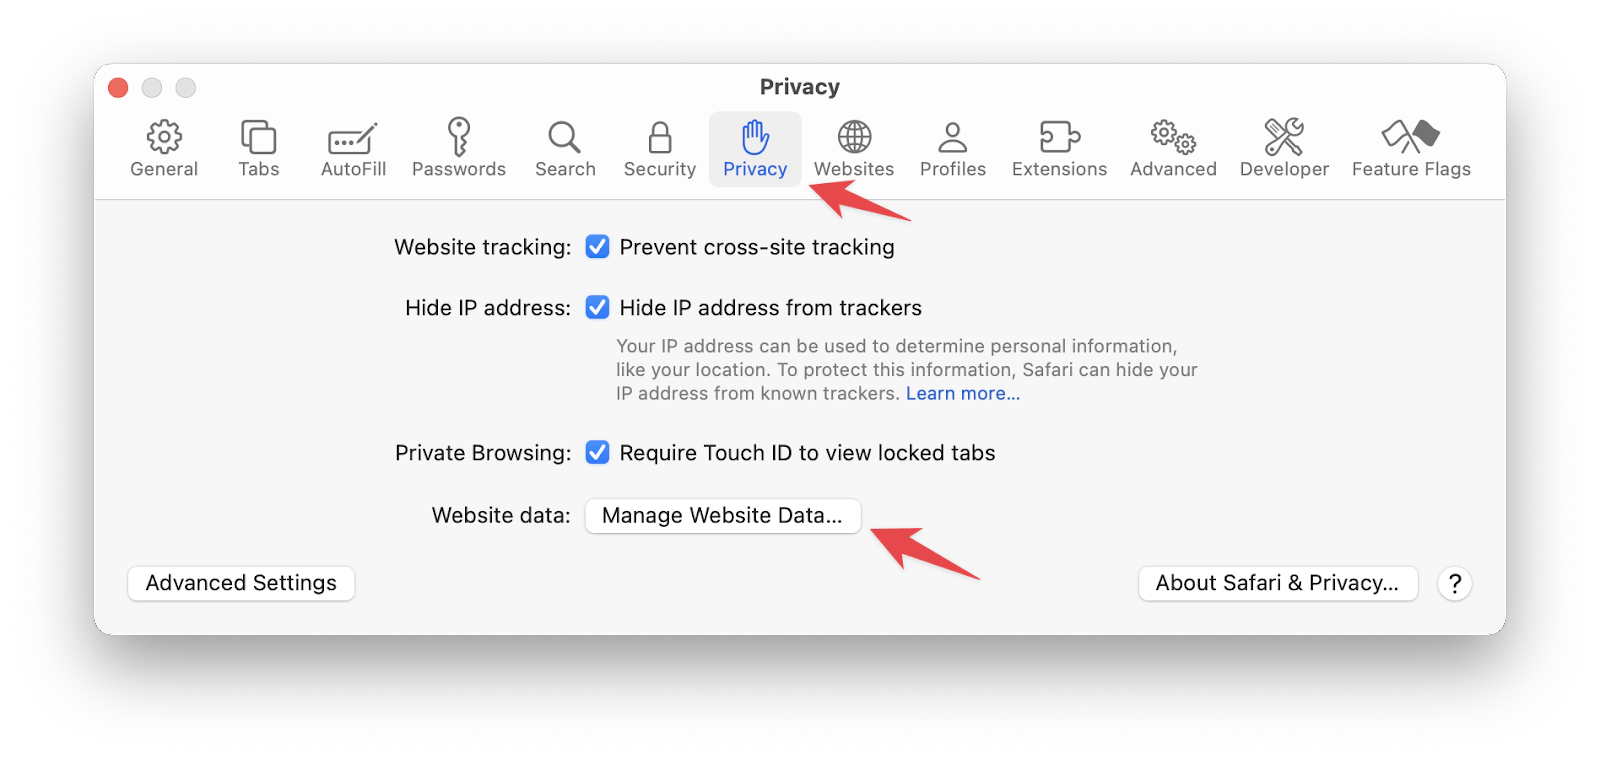 Manage Website Data (cookies and caches) in Safari